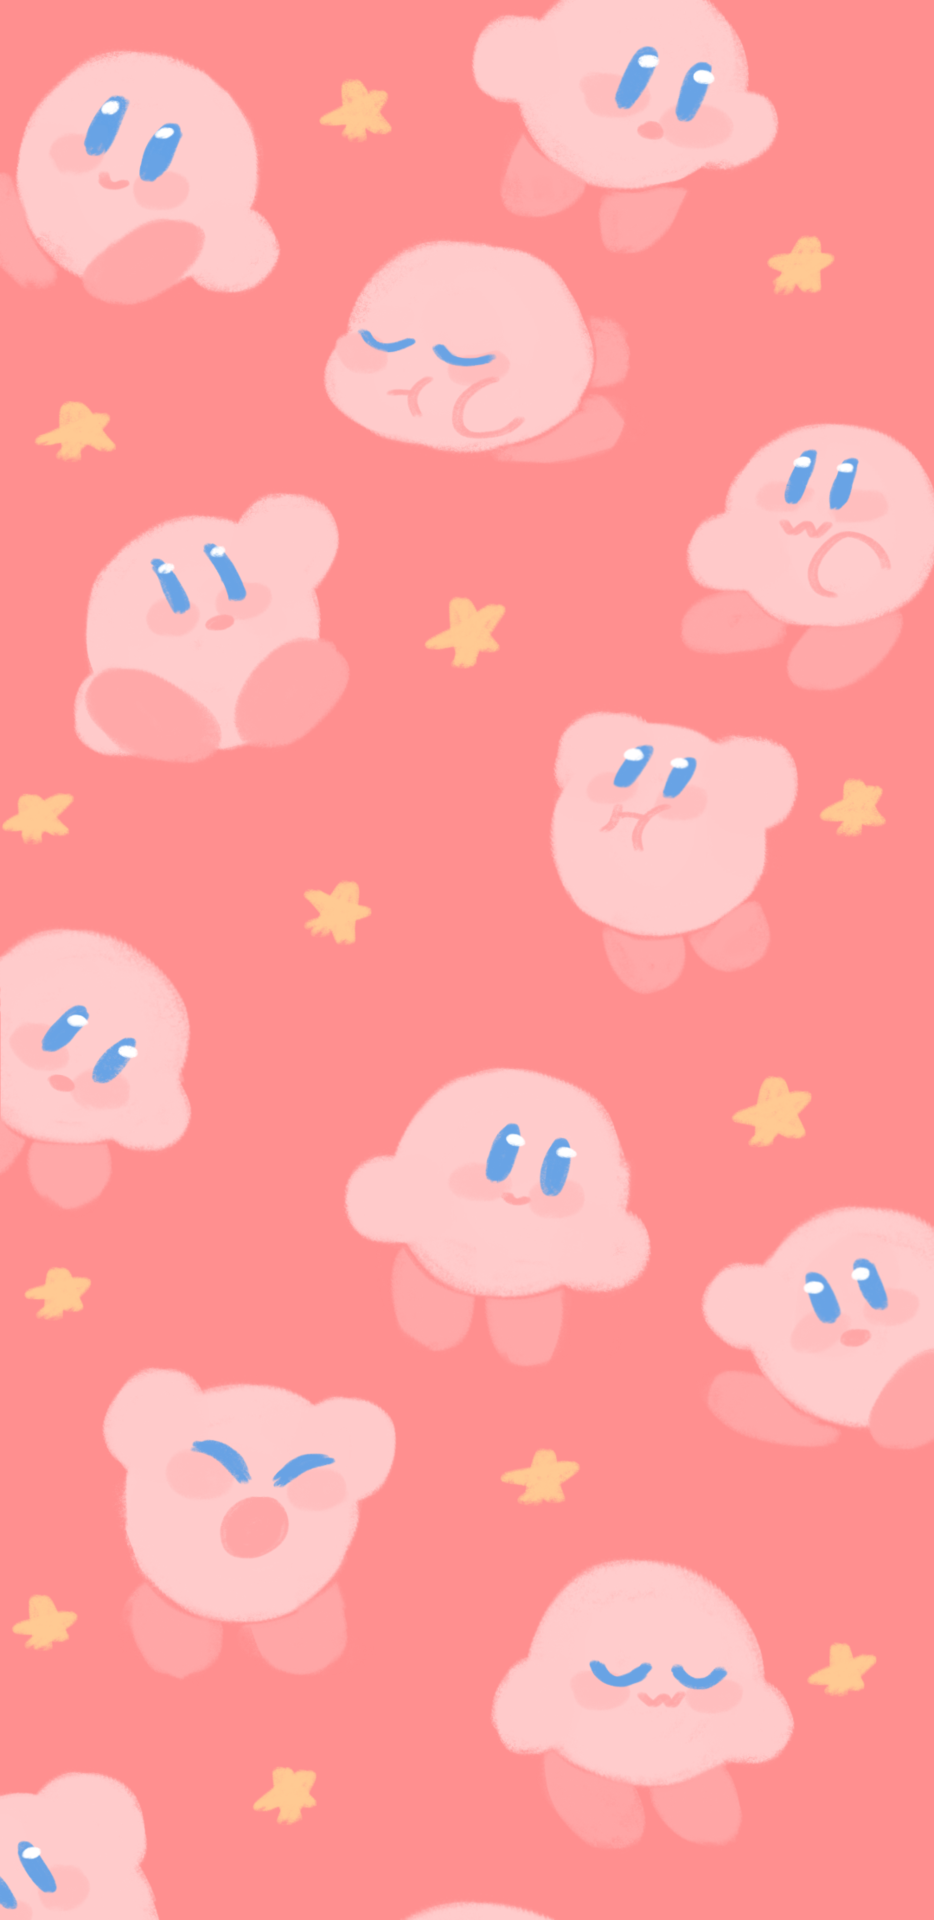 Kirby Aesthetic 420840 Hd Wallpaper Backgrounds Download